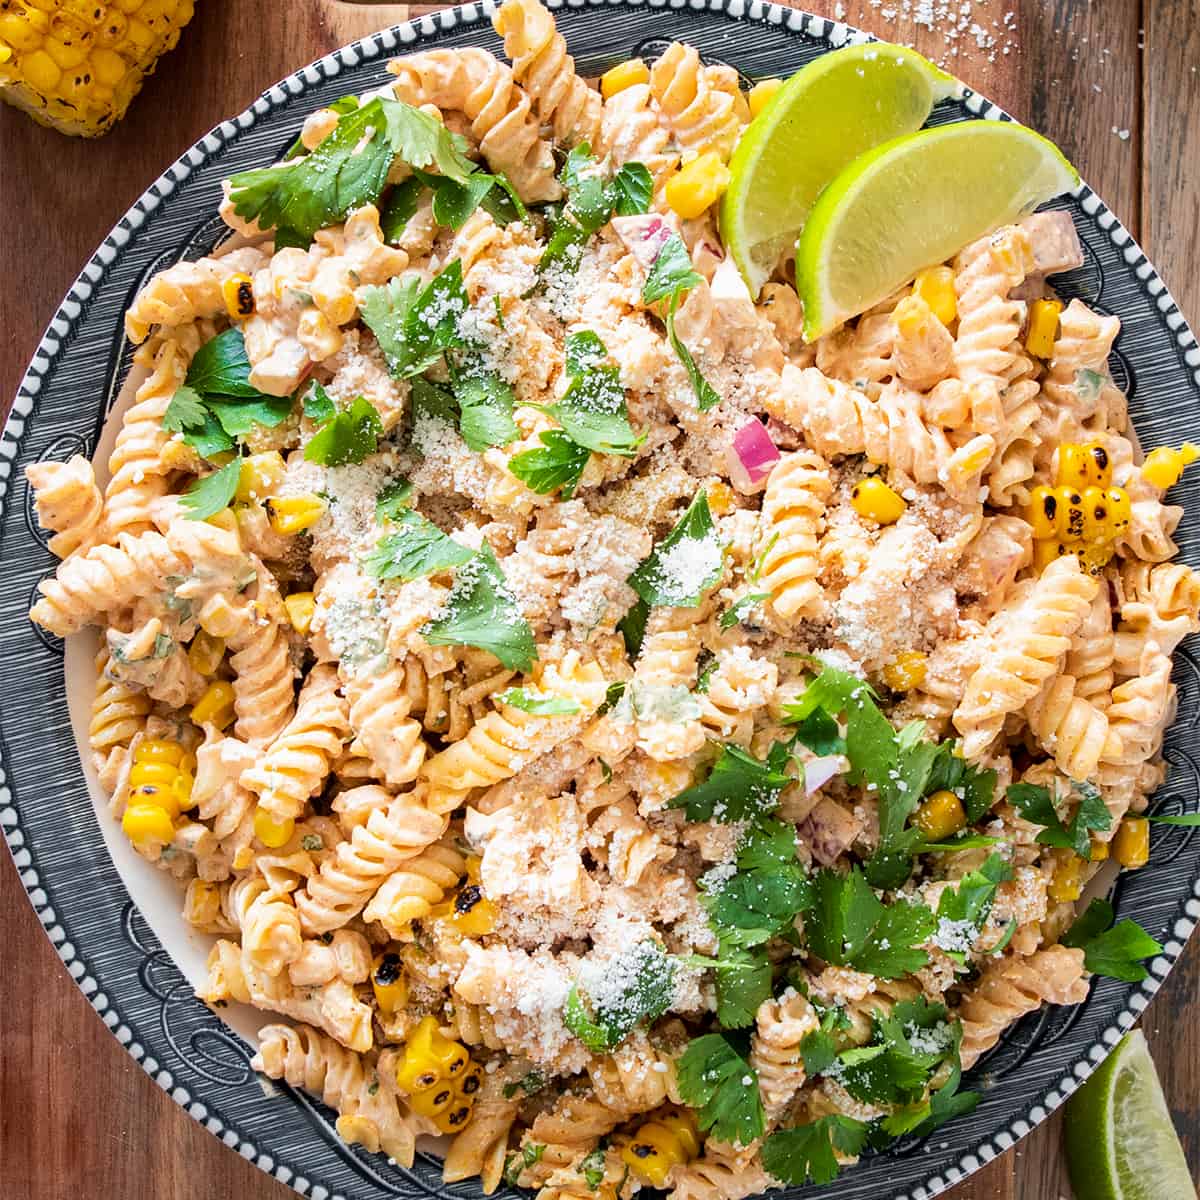 Flatlay of mexican corn salad with cilantro on top and two lime wedges.